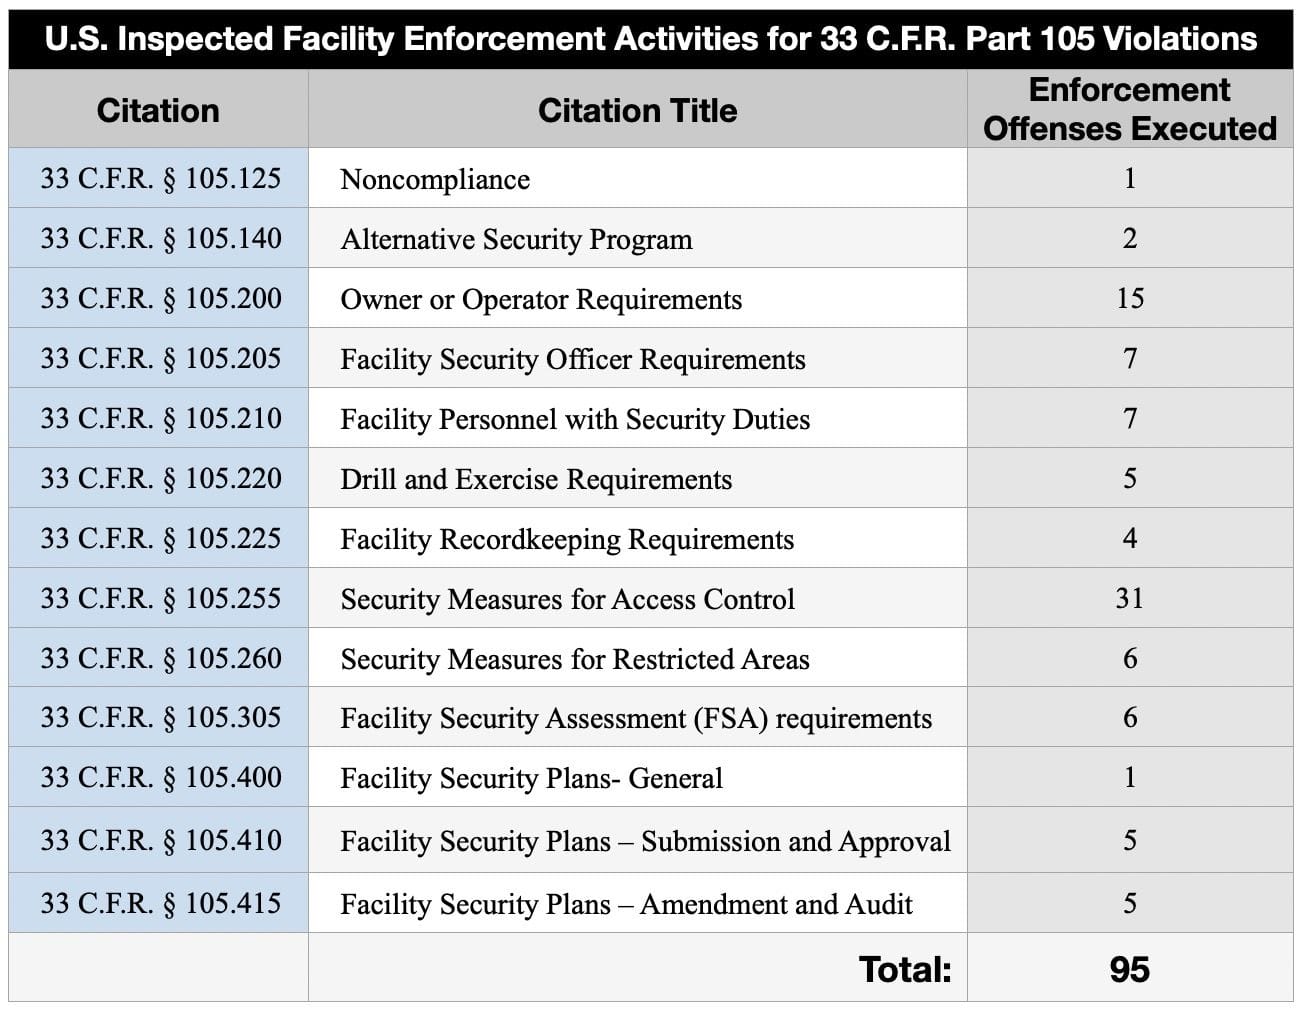 U.S. Inspected Facility Enforcement Activities for 33 C.F.R. Part 105 Violations